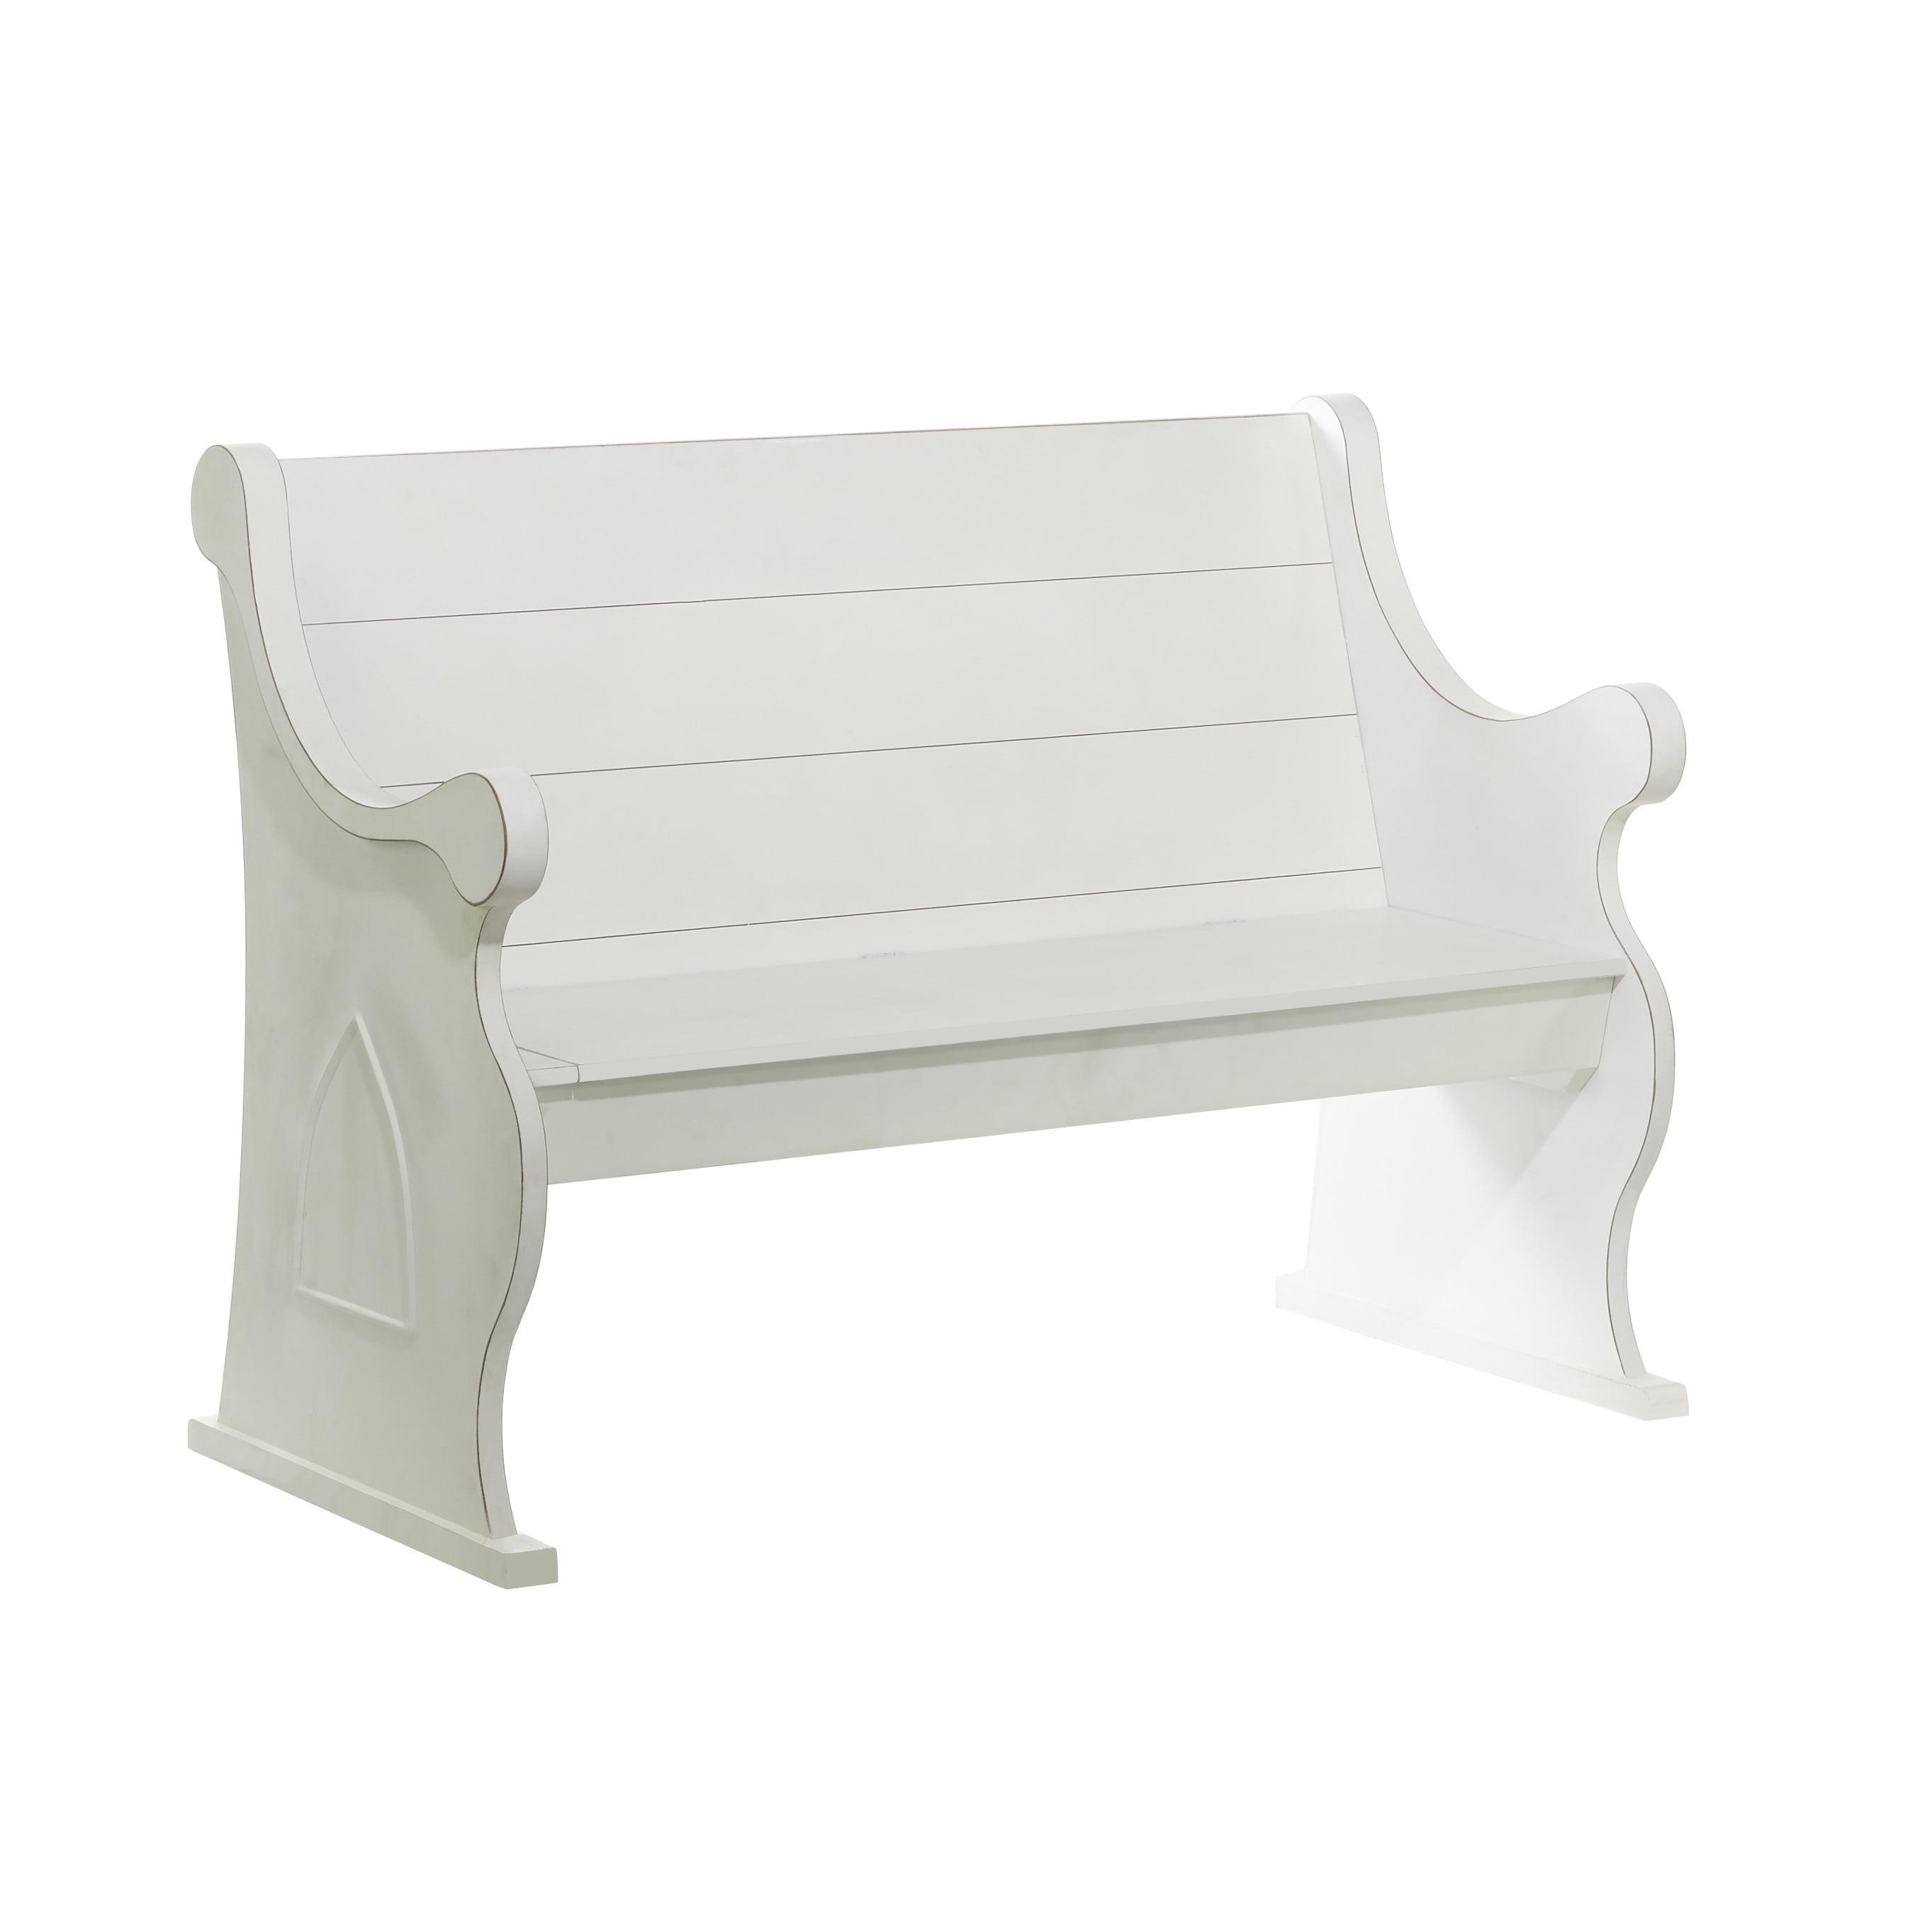 Classic White Wood Storage Bench with Scrolled Armrests, 50" x 36"